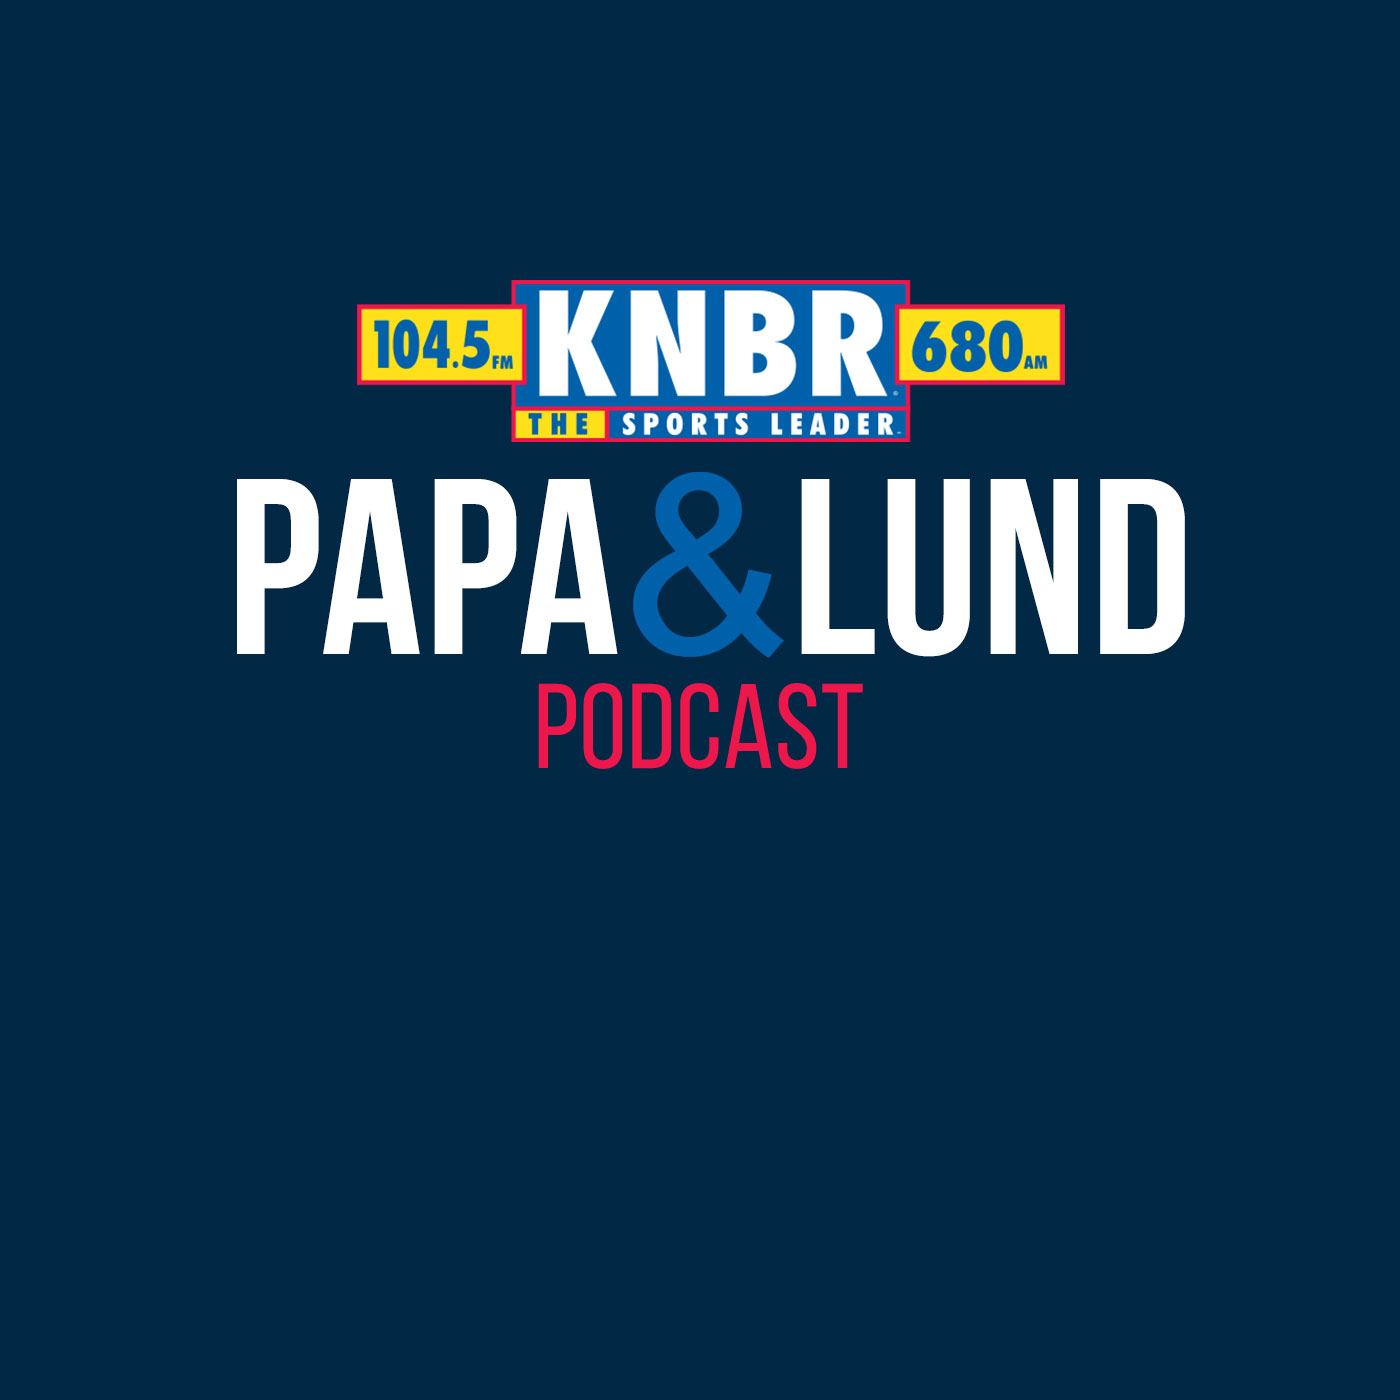 3-7 Papa & Lund Show - Hour 2 - Papa & Lund discuss Giants pitching staff as well as the 49ers must have Free Agents with their window closing